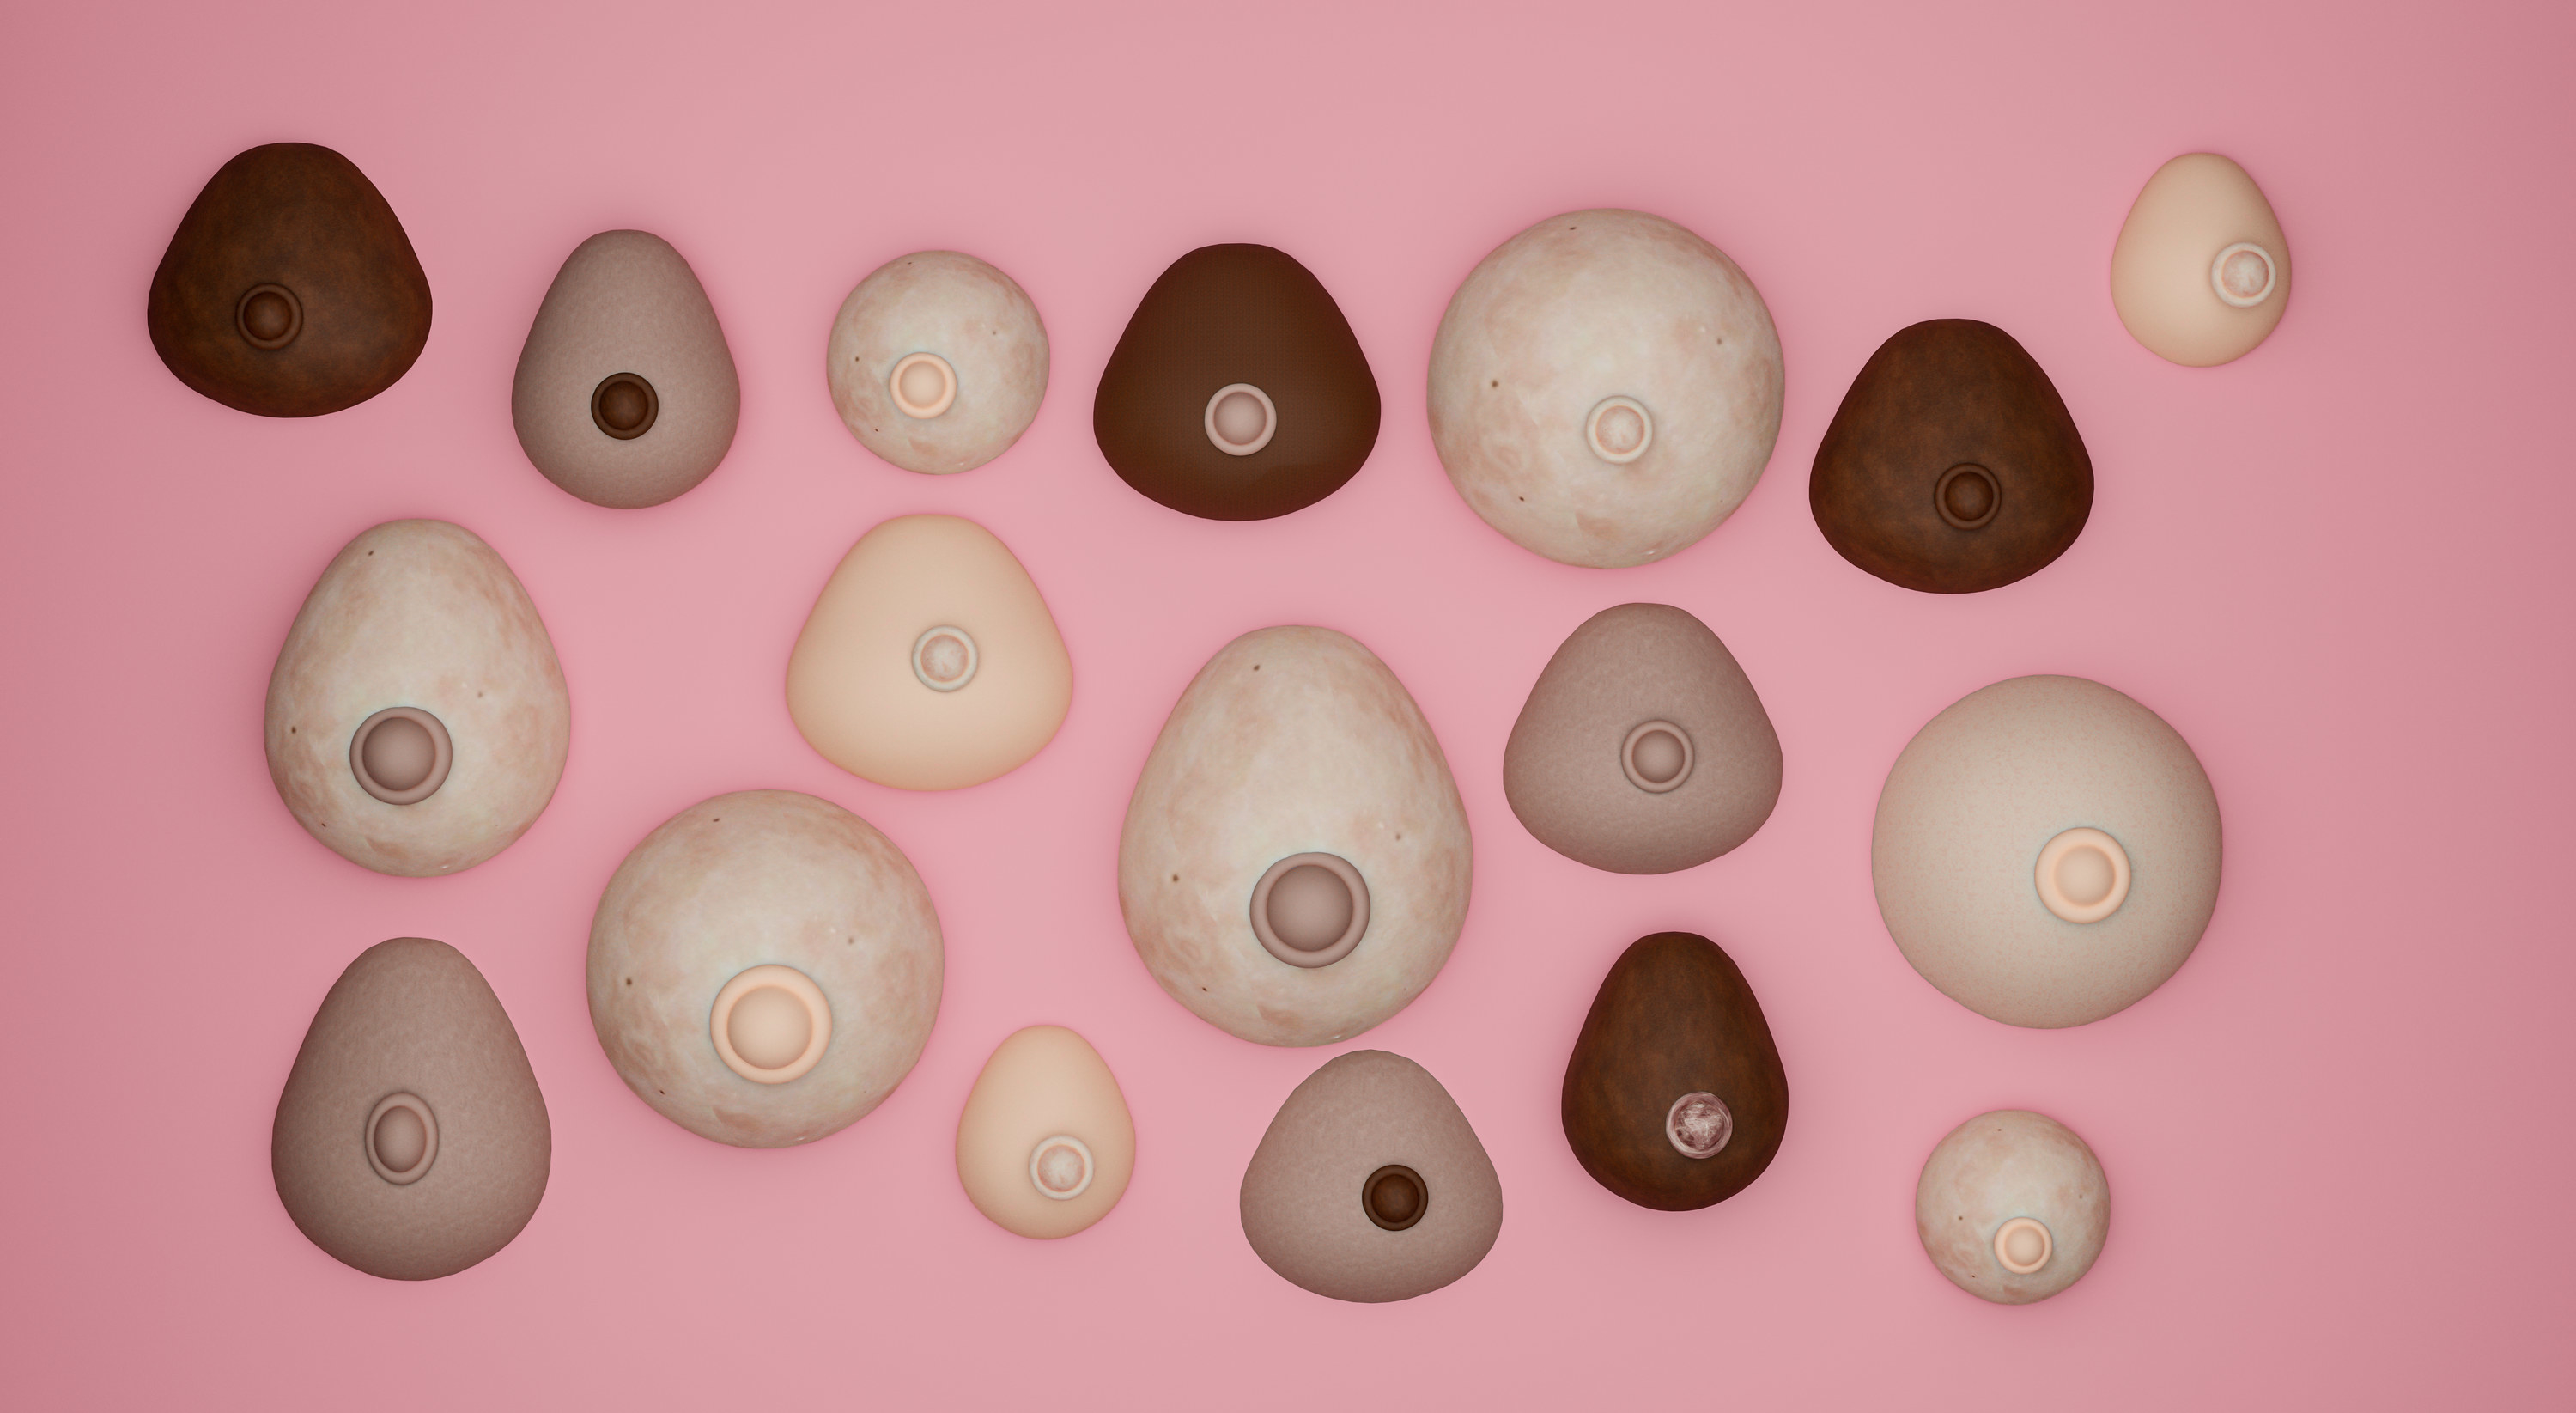 Examples of differently shaped breasts